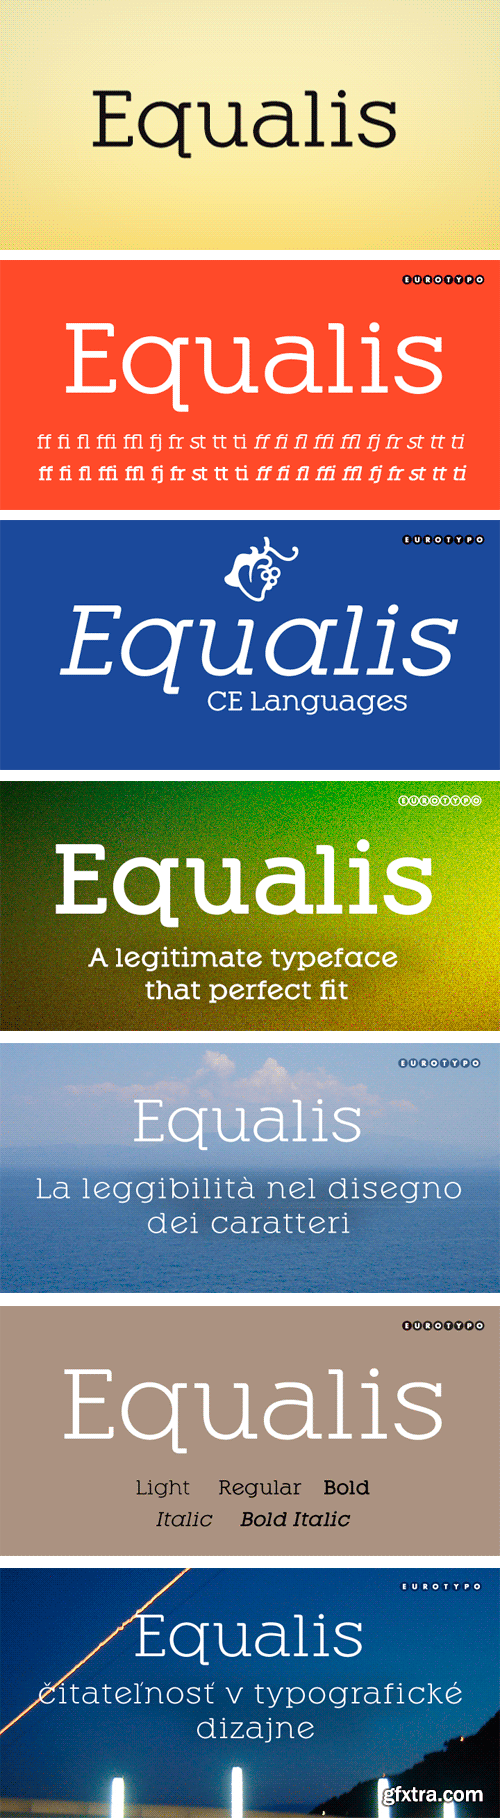 Equalis Font Family